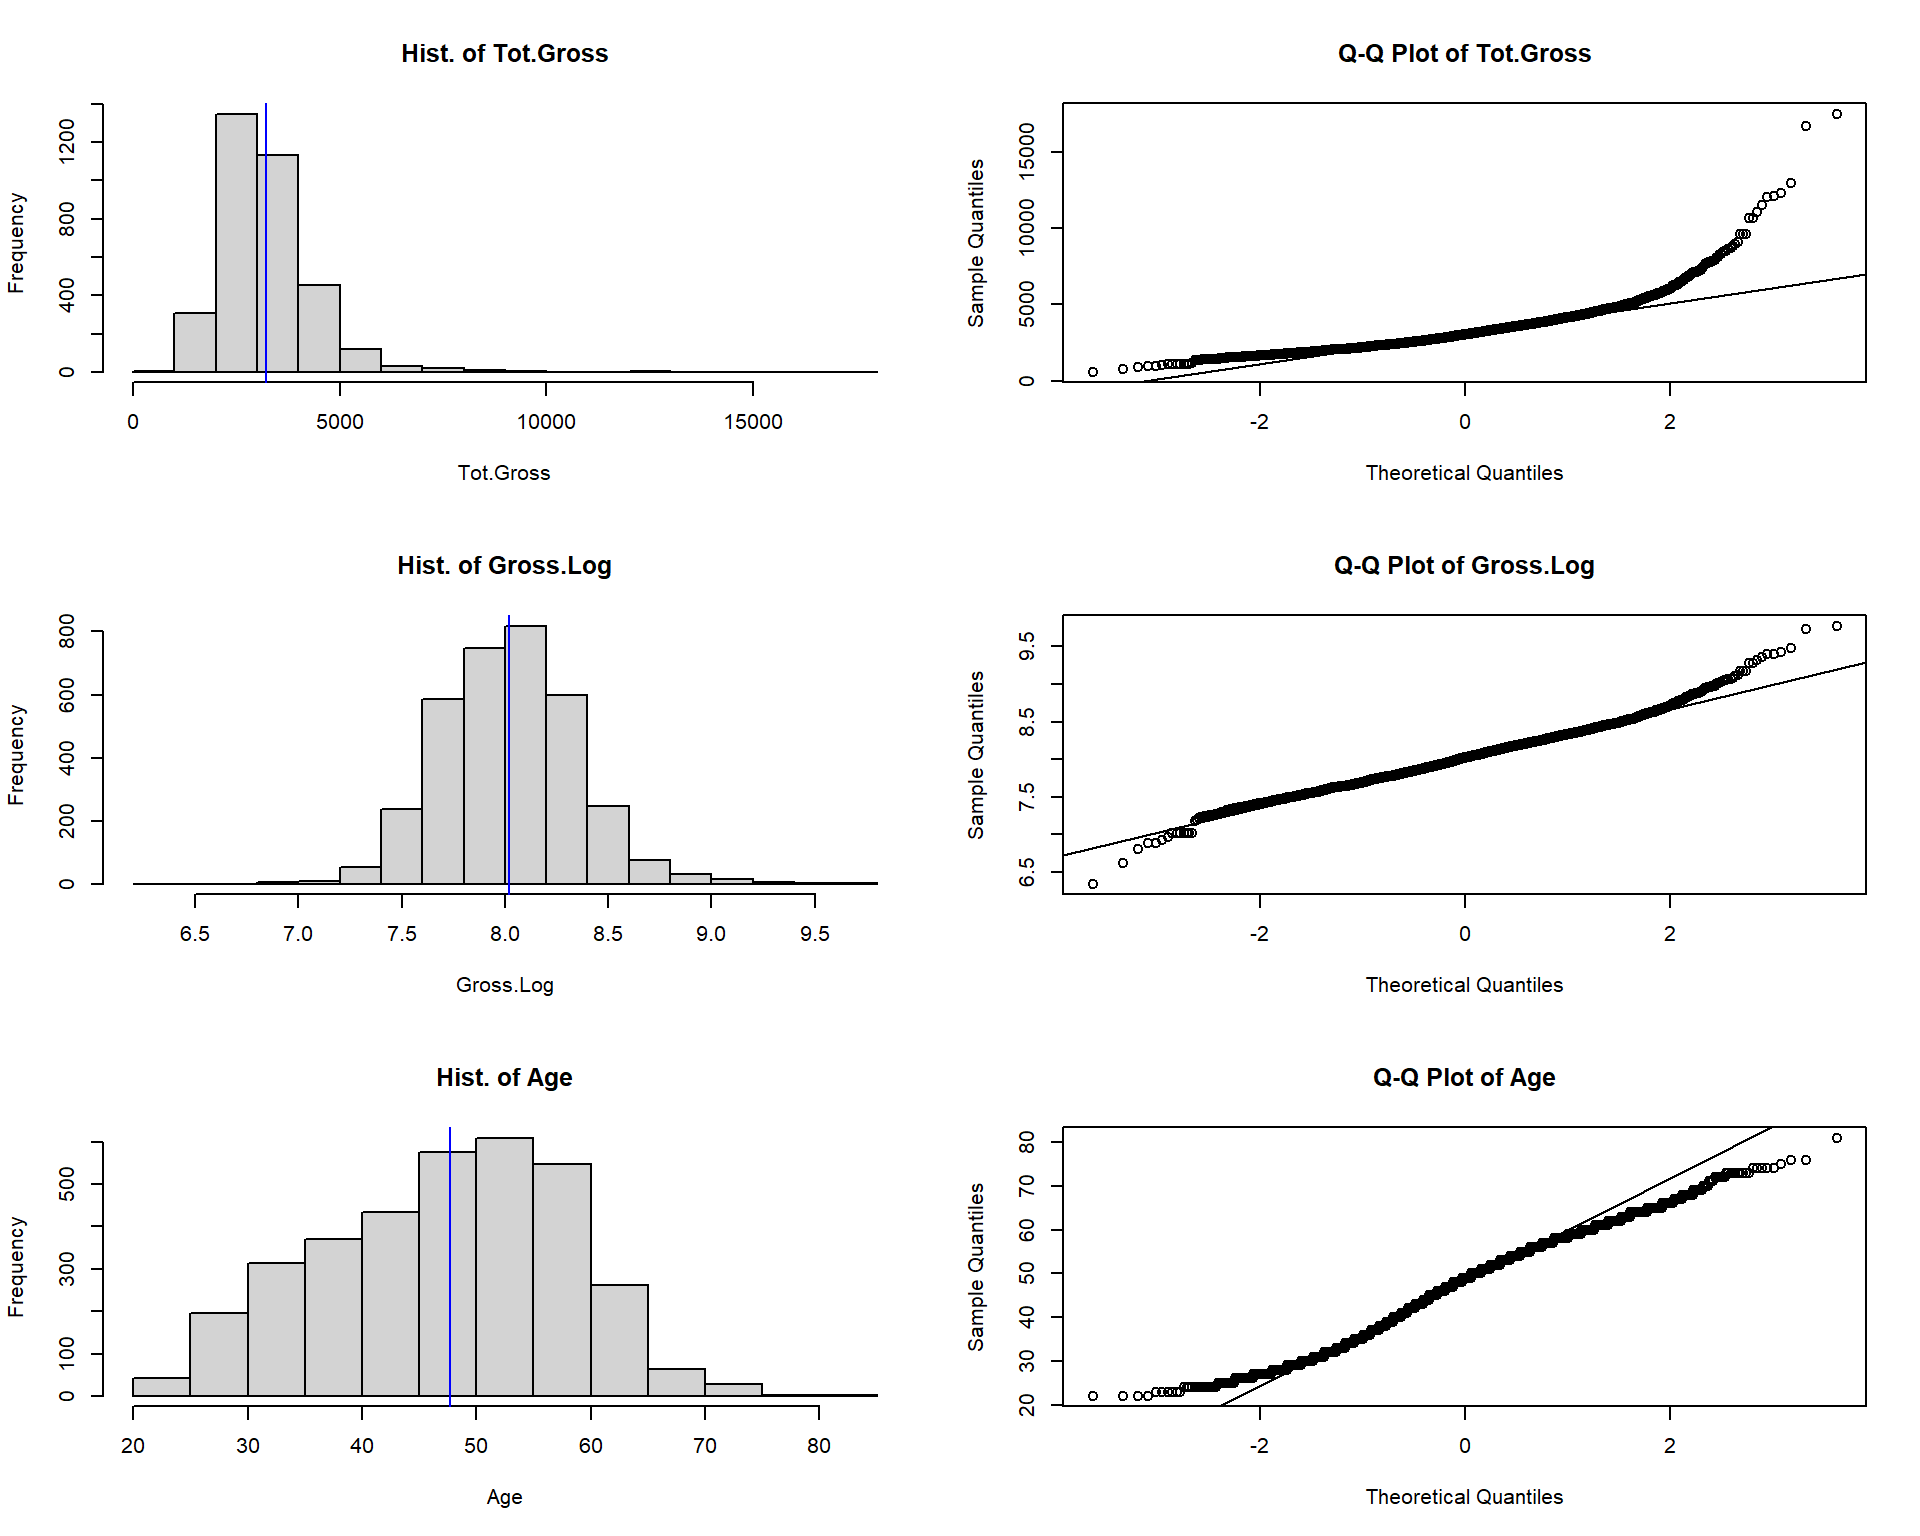 Histogram and QQ plot for total gross, log of gross and age.